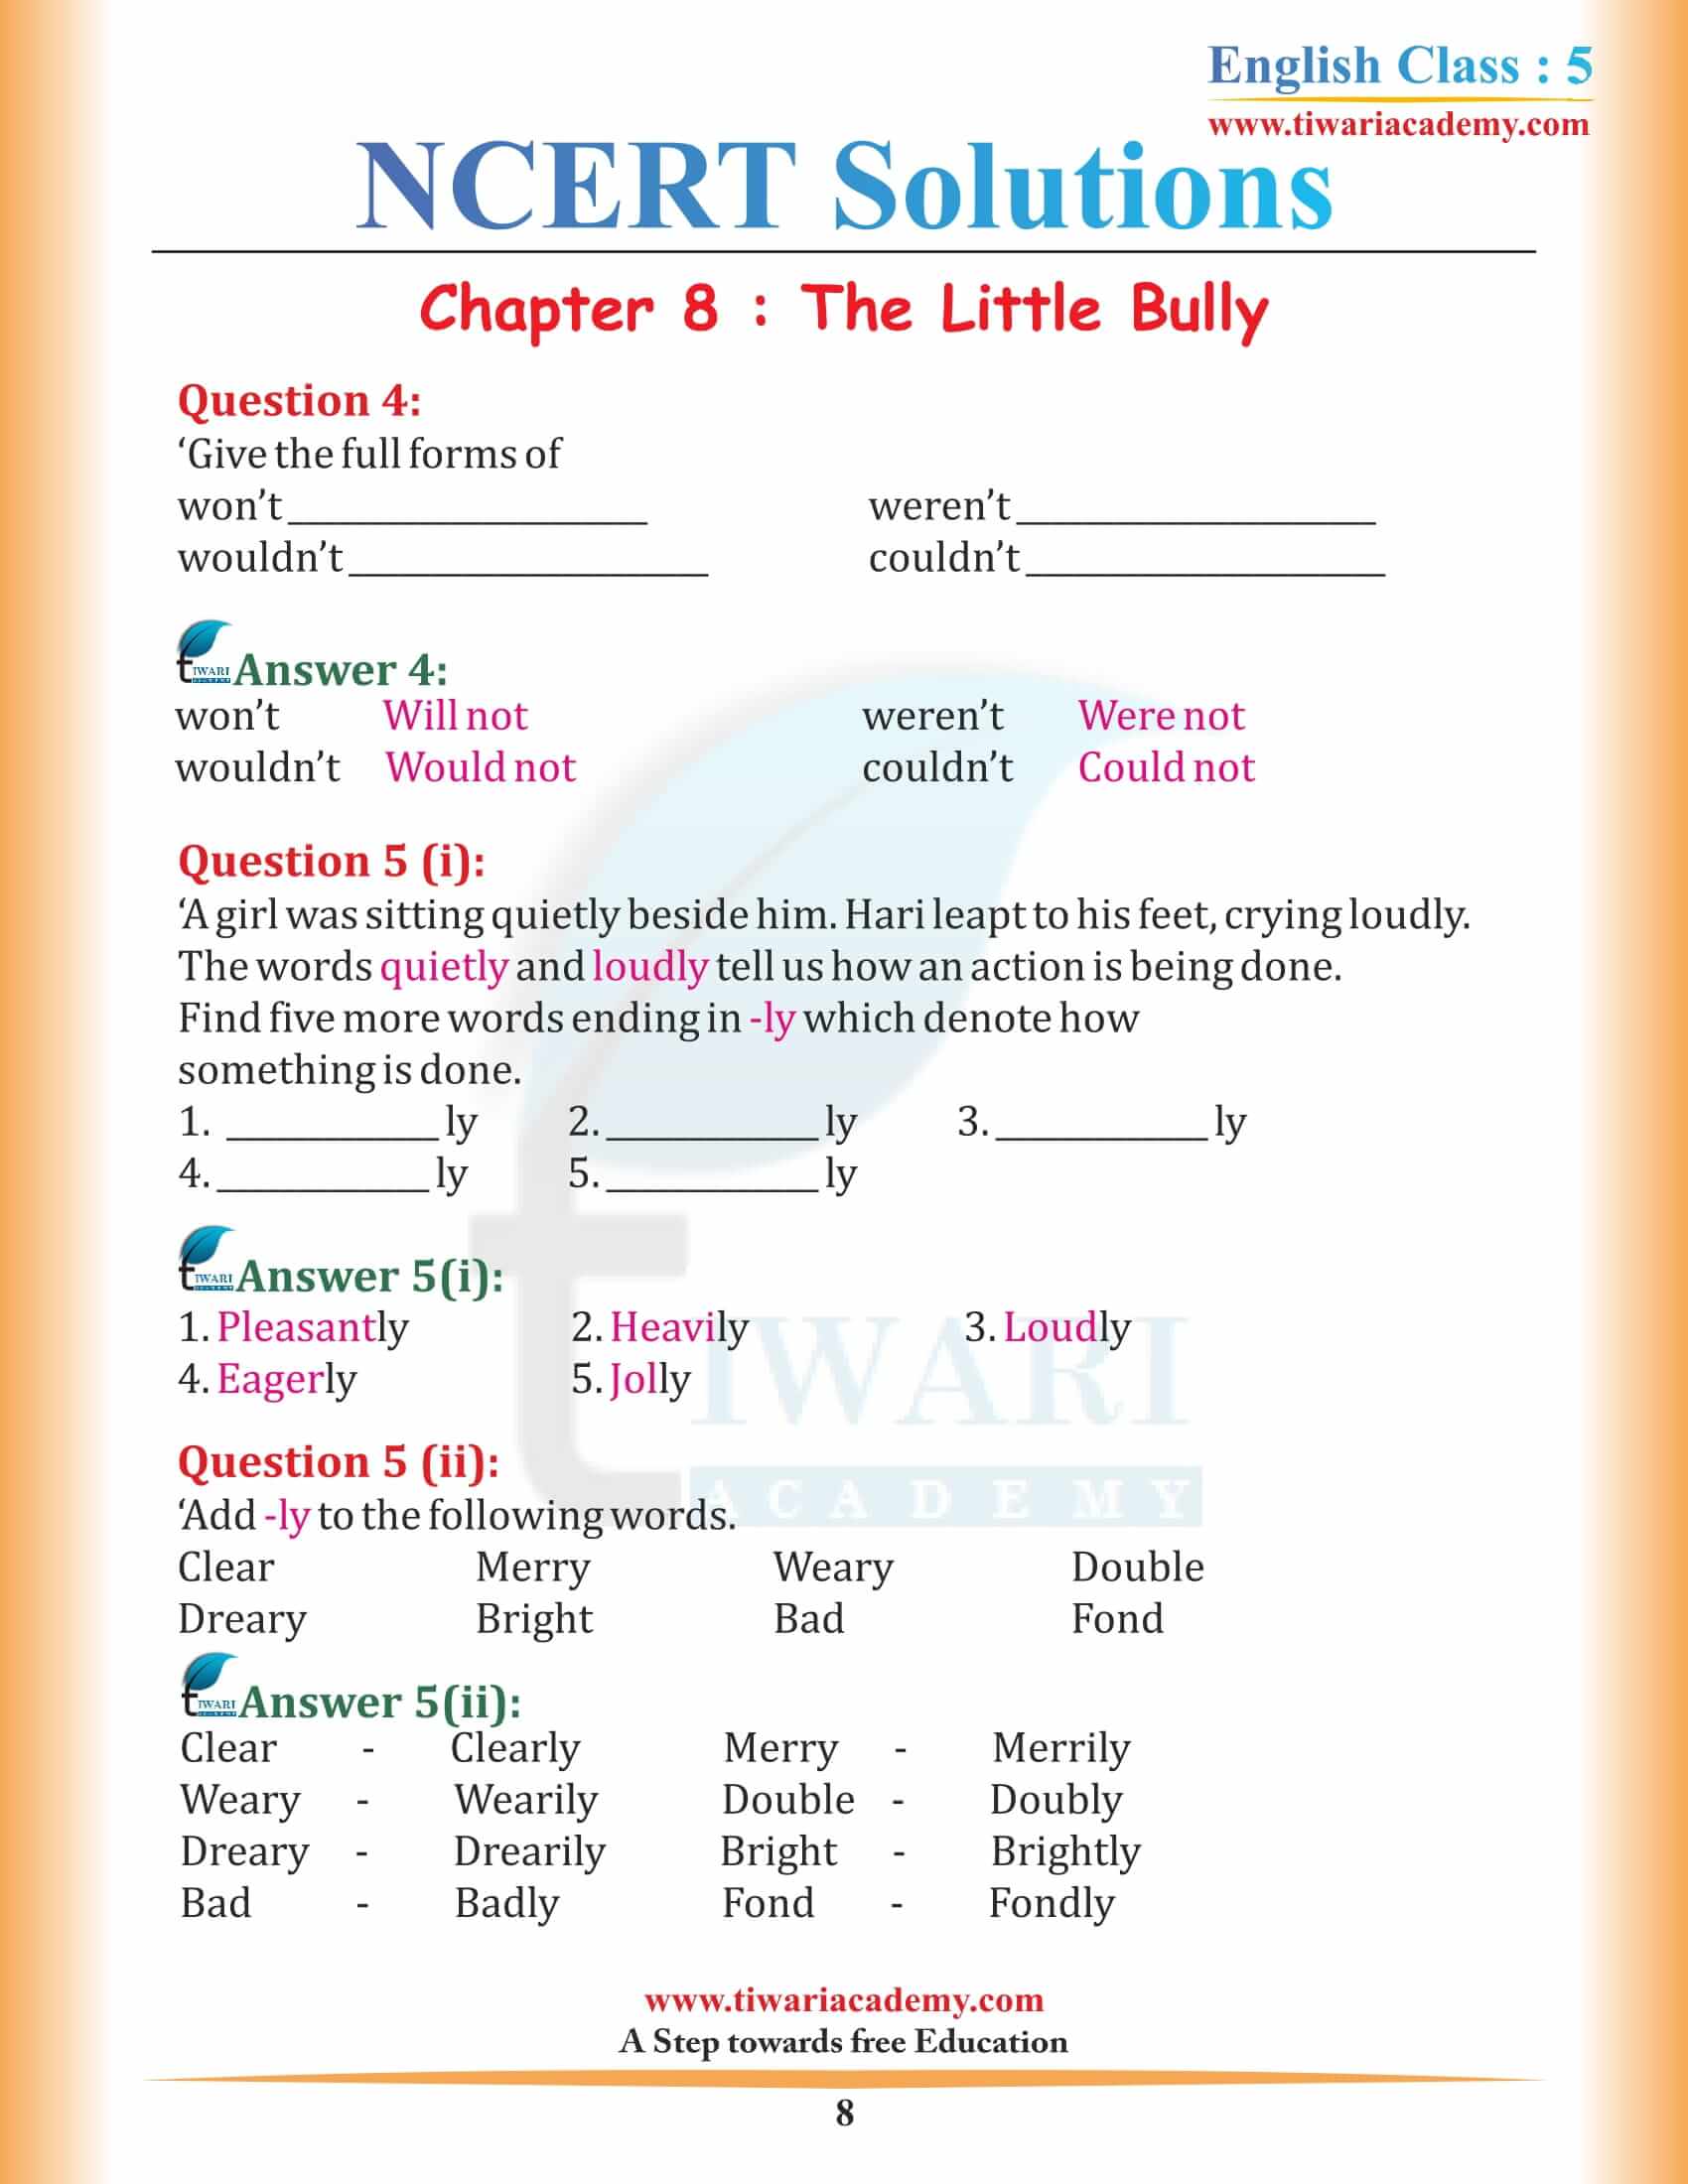 NCERT Solutions for Class 5 English Chapter 8 The Little Bully PDF